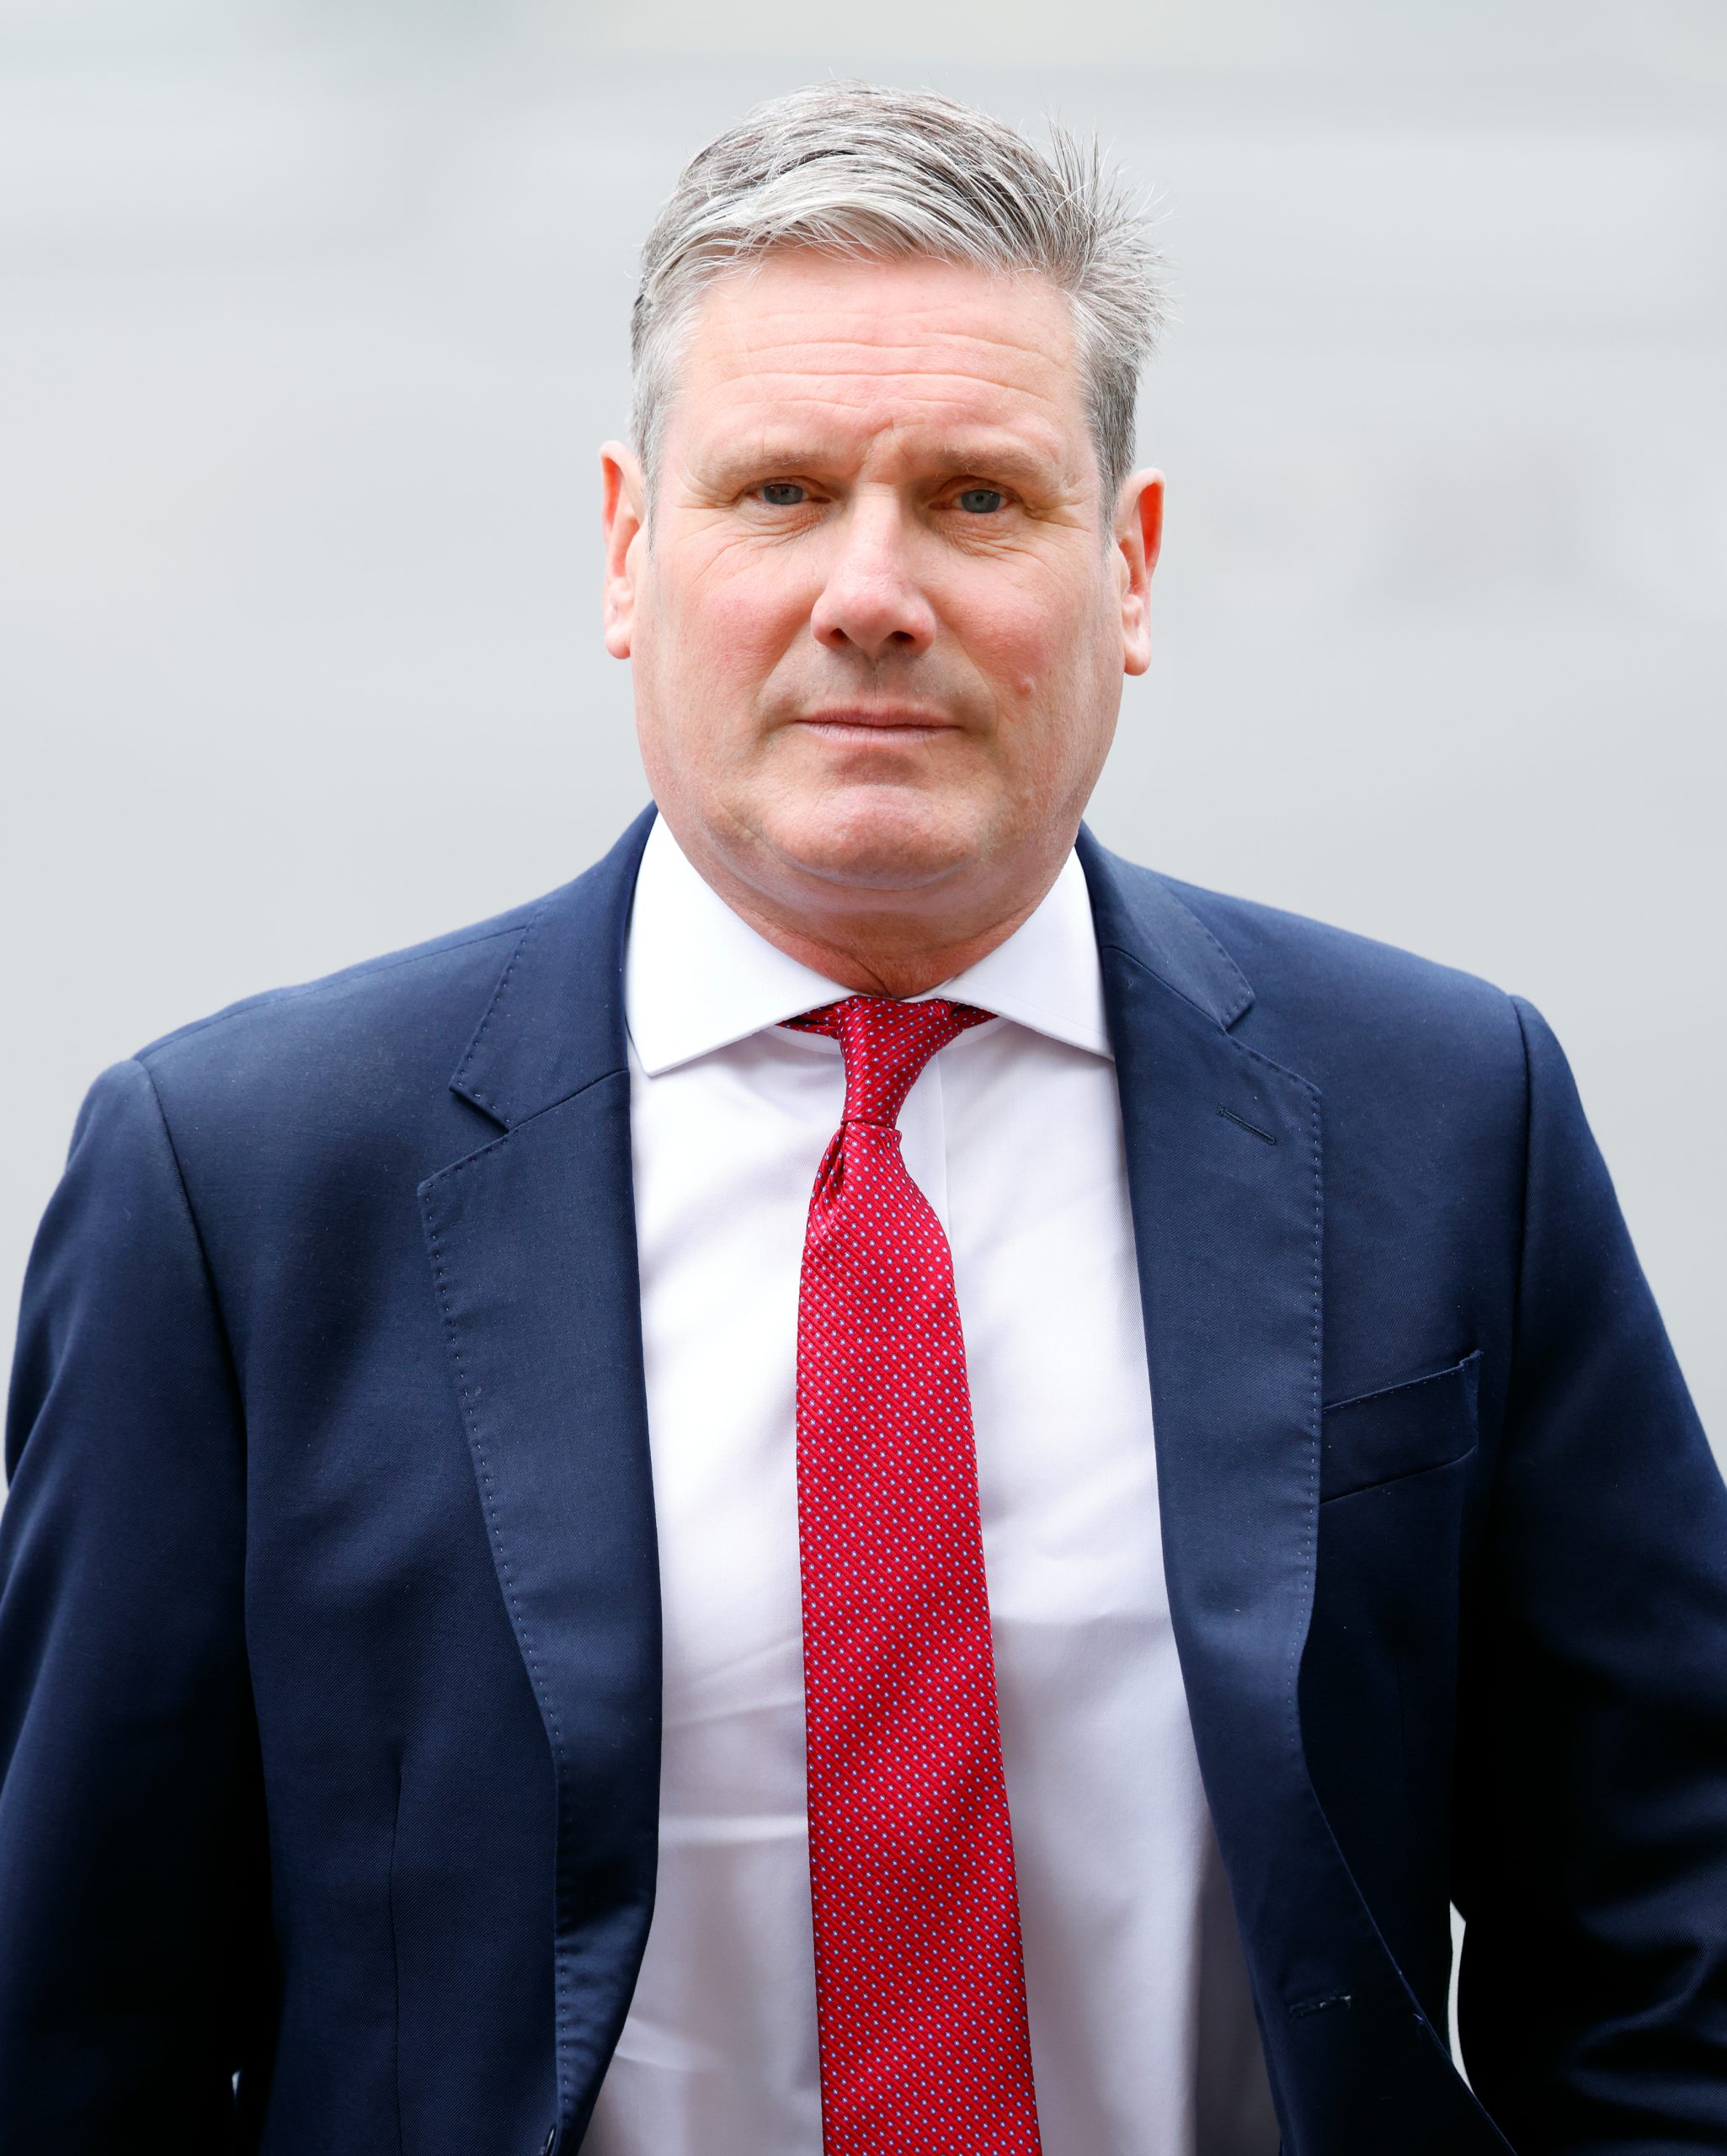 Hard-pressed Brit families ‘face a £2,200-a-year tax bombshell if Sir Keir Starmer seizes power’